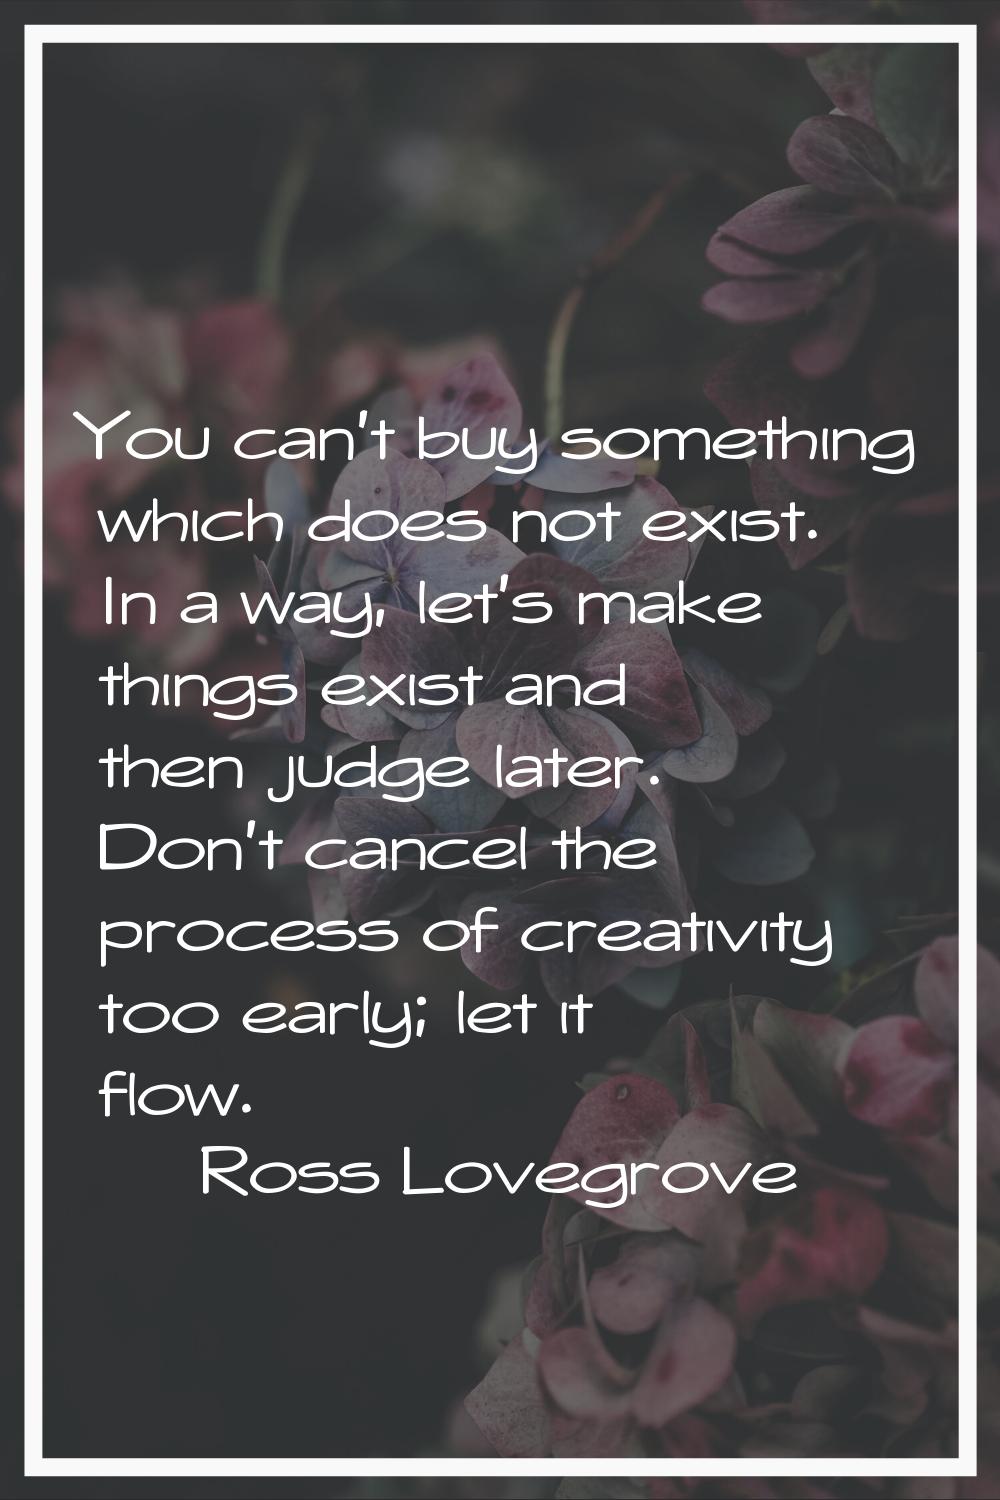 You can't buy something which does not exist. In a way, let's make things exist and then judge late